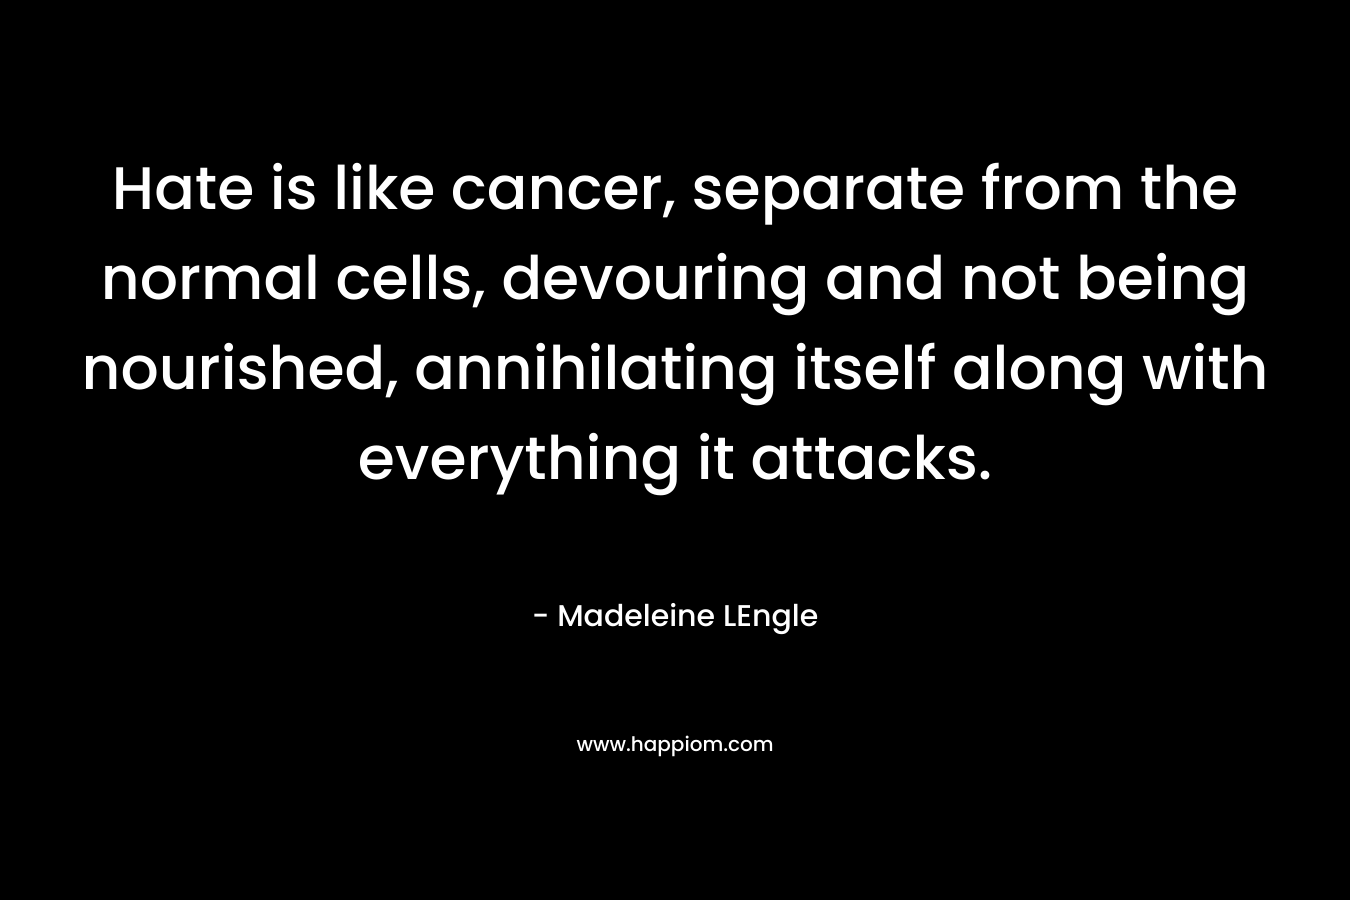 Hate is like cancer, separate from the normal cells, devouring and not being nourished, annihilating itself along with everything it attacks.